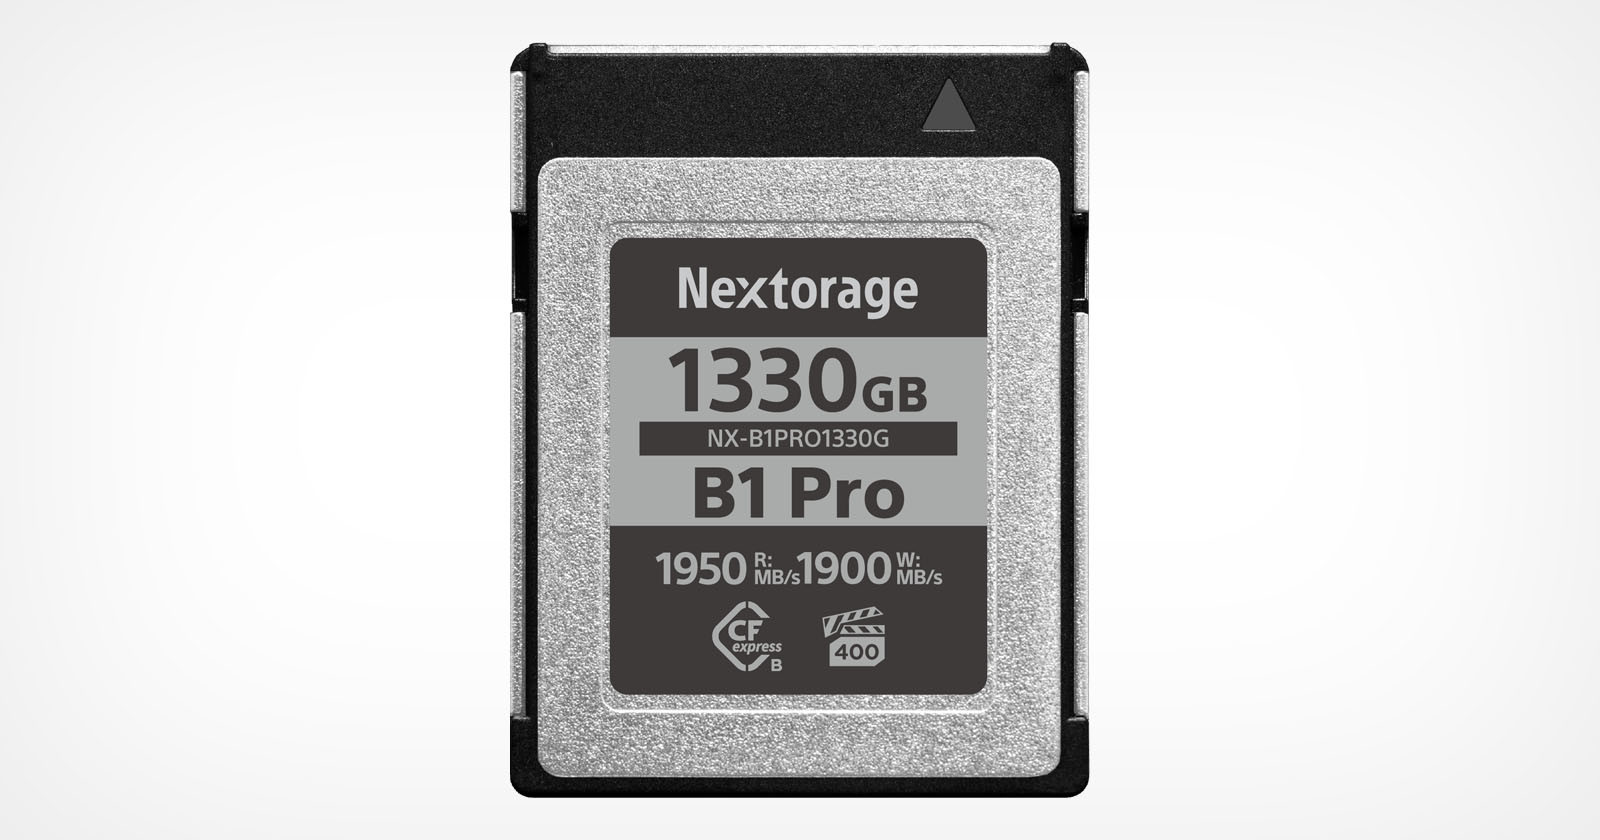 Nextorage Says it Has Made the Fastest CFexpress Cards Yet